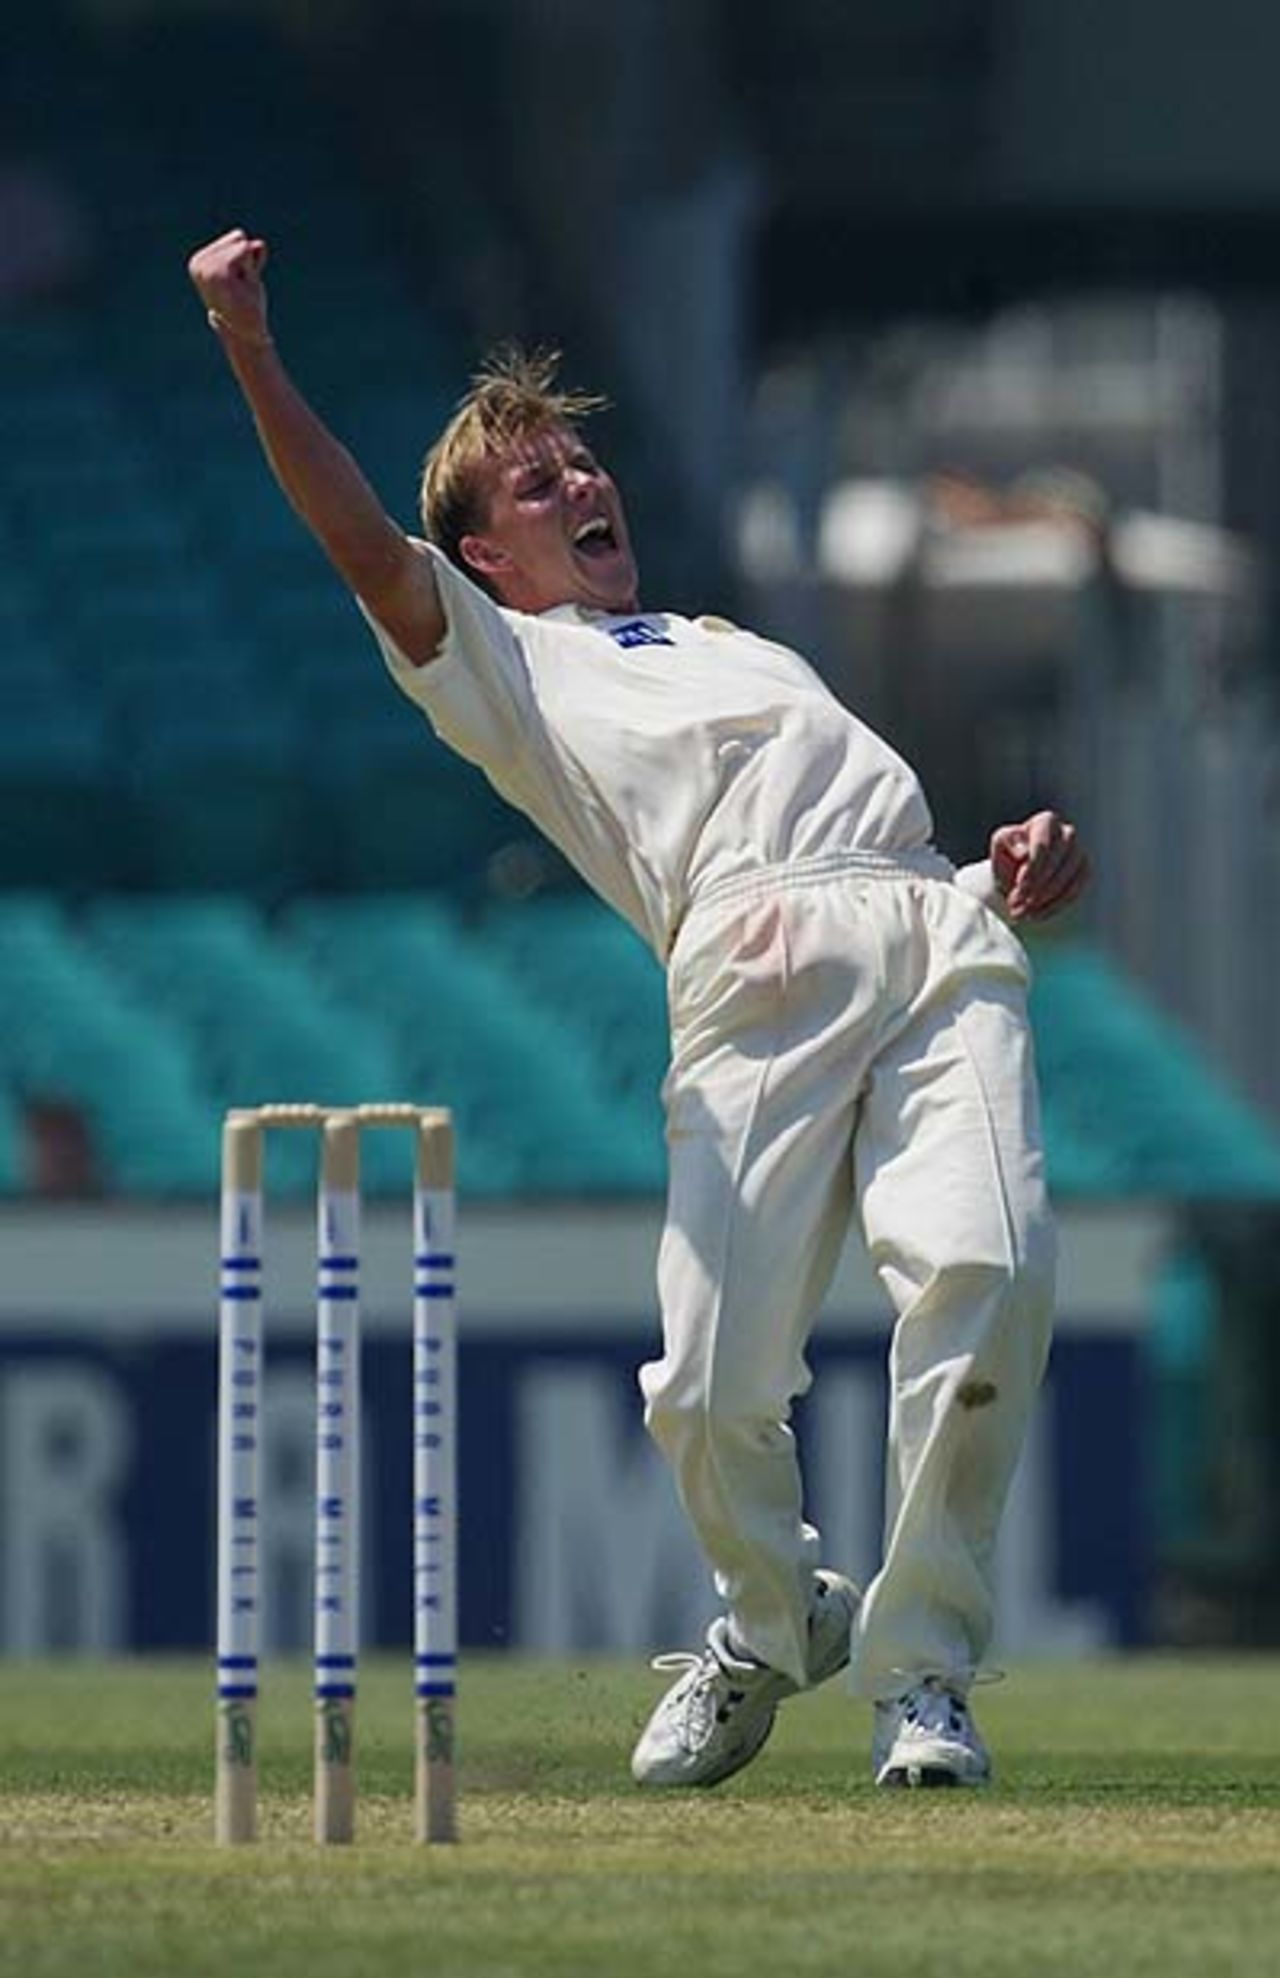 SYDNEY - NOVEMBER 8: Brett Lee of the Blues celebrates the wicket of Daniel Marsh of the Tigers during the Pura Cup match between the New South Wales Blues and the Tasmania Tigers at the Sydney Cricket Ground in Sydney, Australia on November 8, 2002.